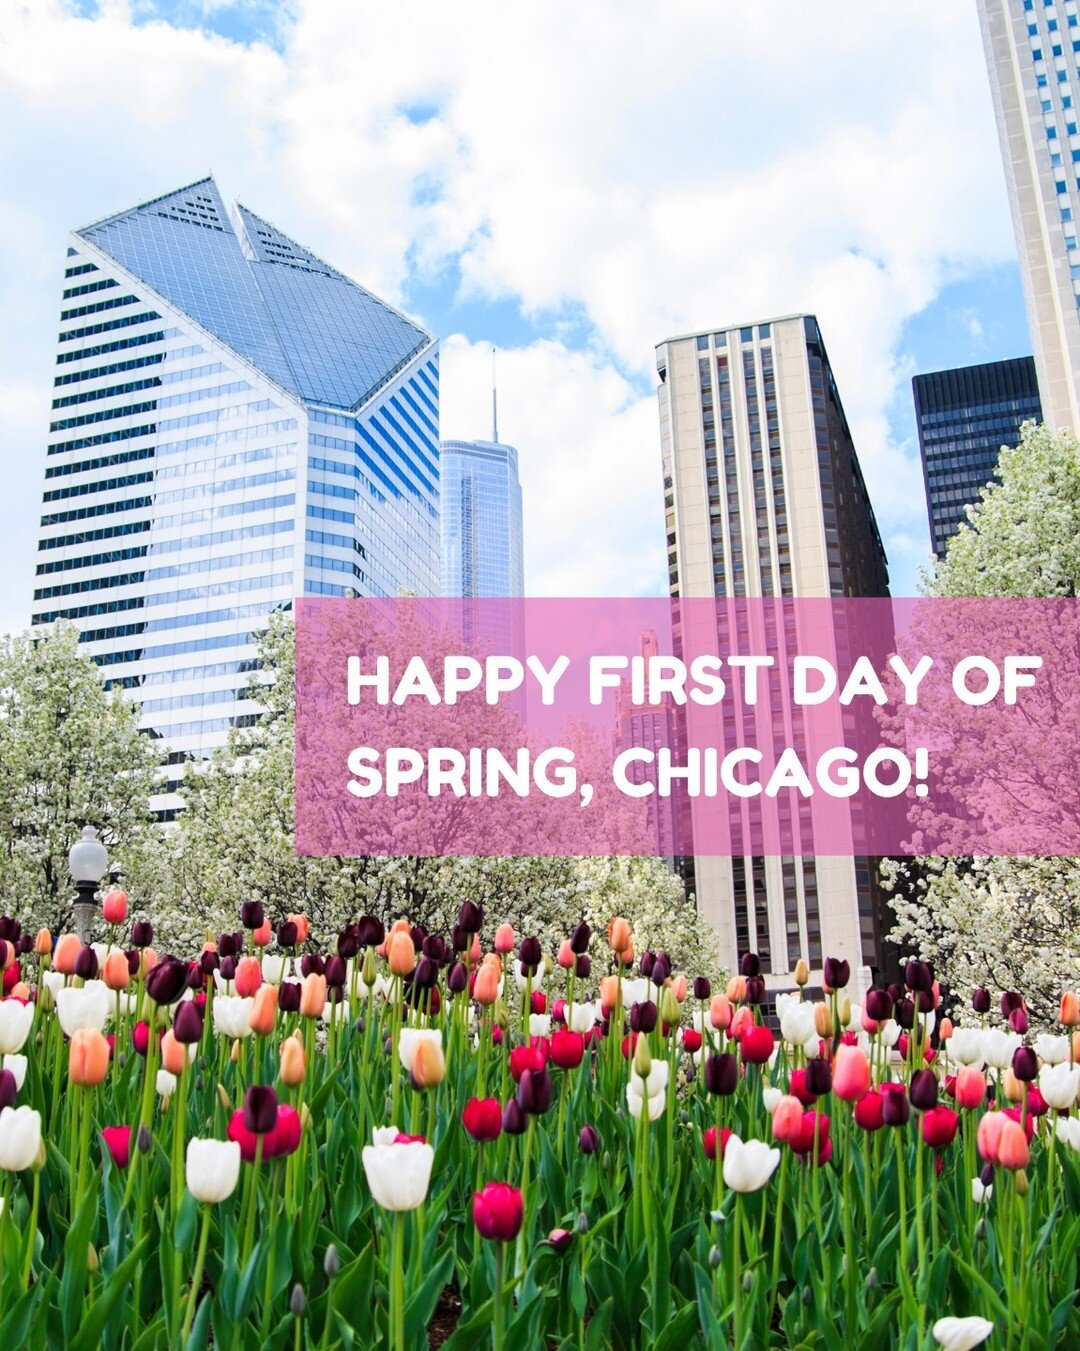 Happy First Day of Spring, Chicago! 🌸 Let's welcome the season of renewal with fresh starts and sparkling spaces. It's time for some spring cleaning magic! ✨

#SpringCleaning #ChicagoSpring #FreshStarts